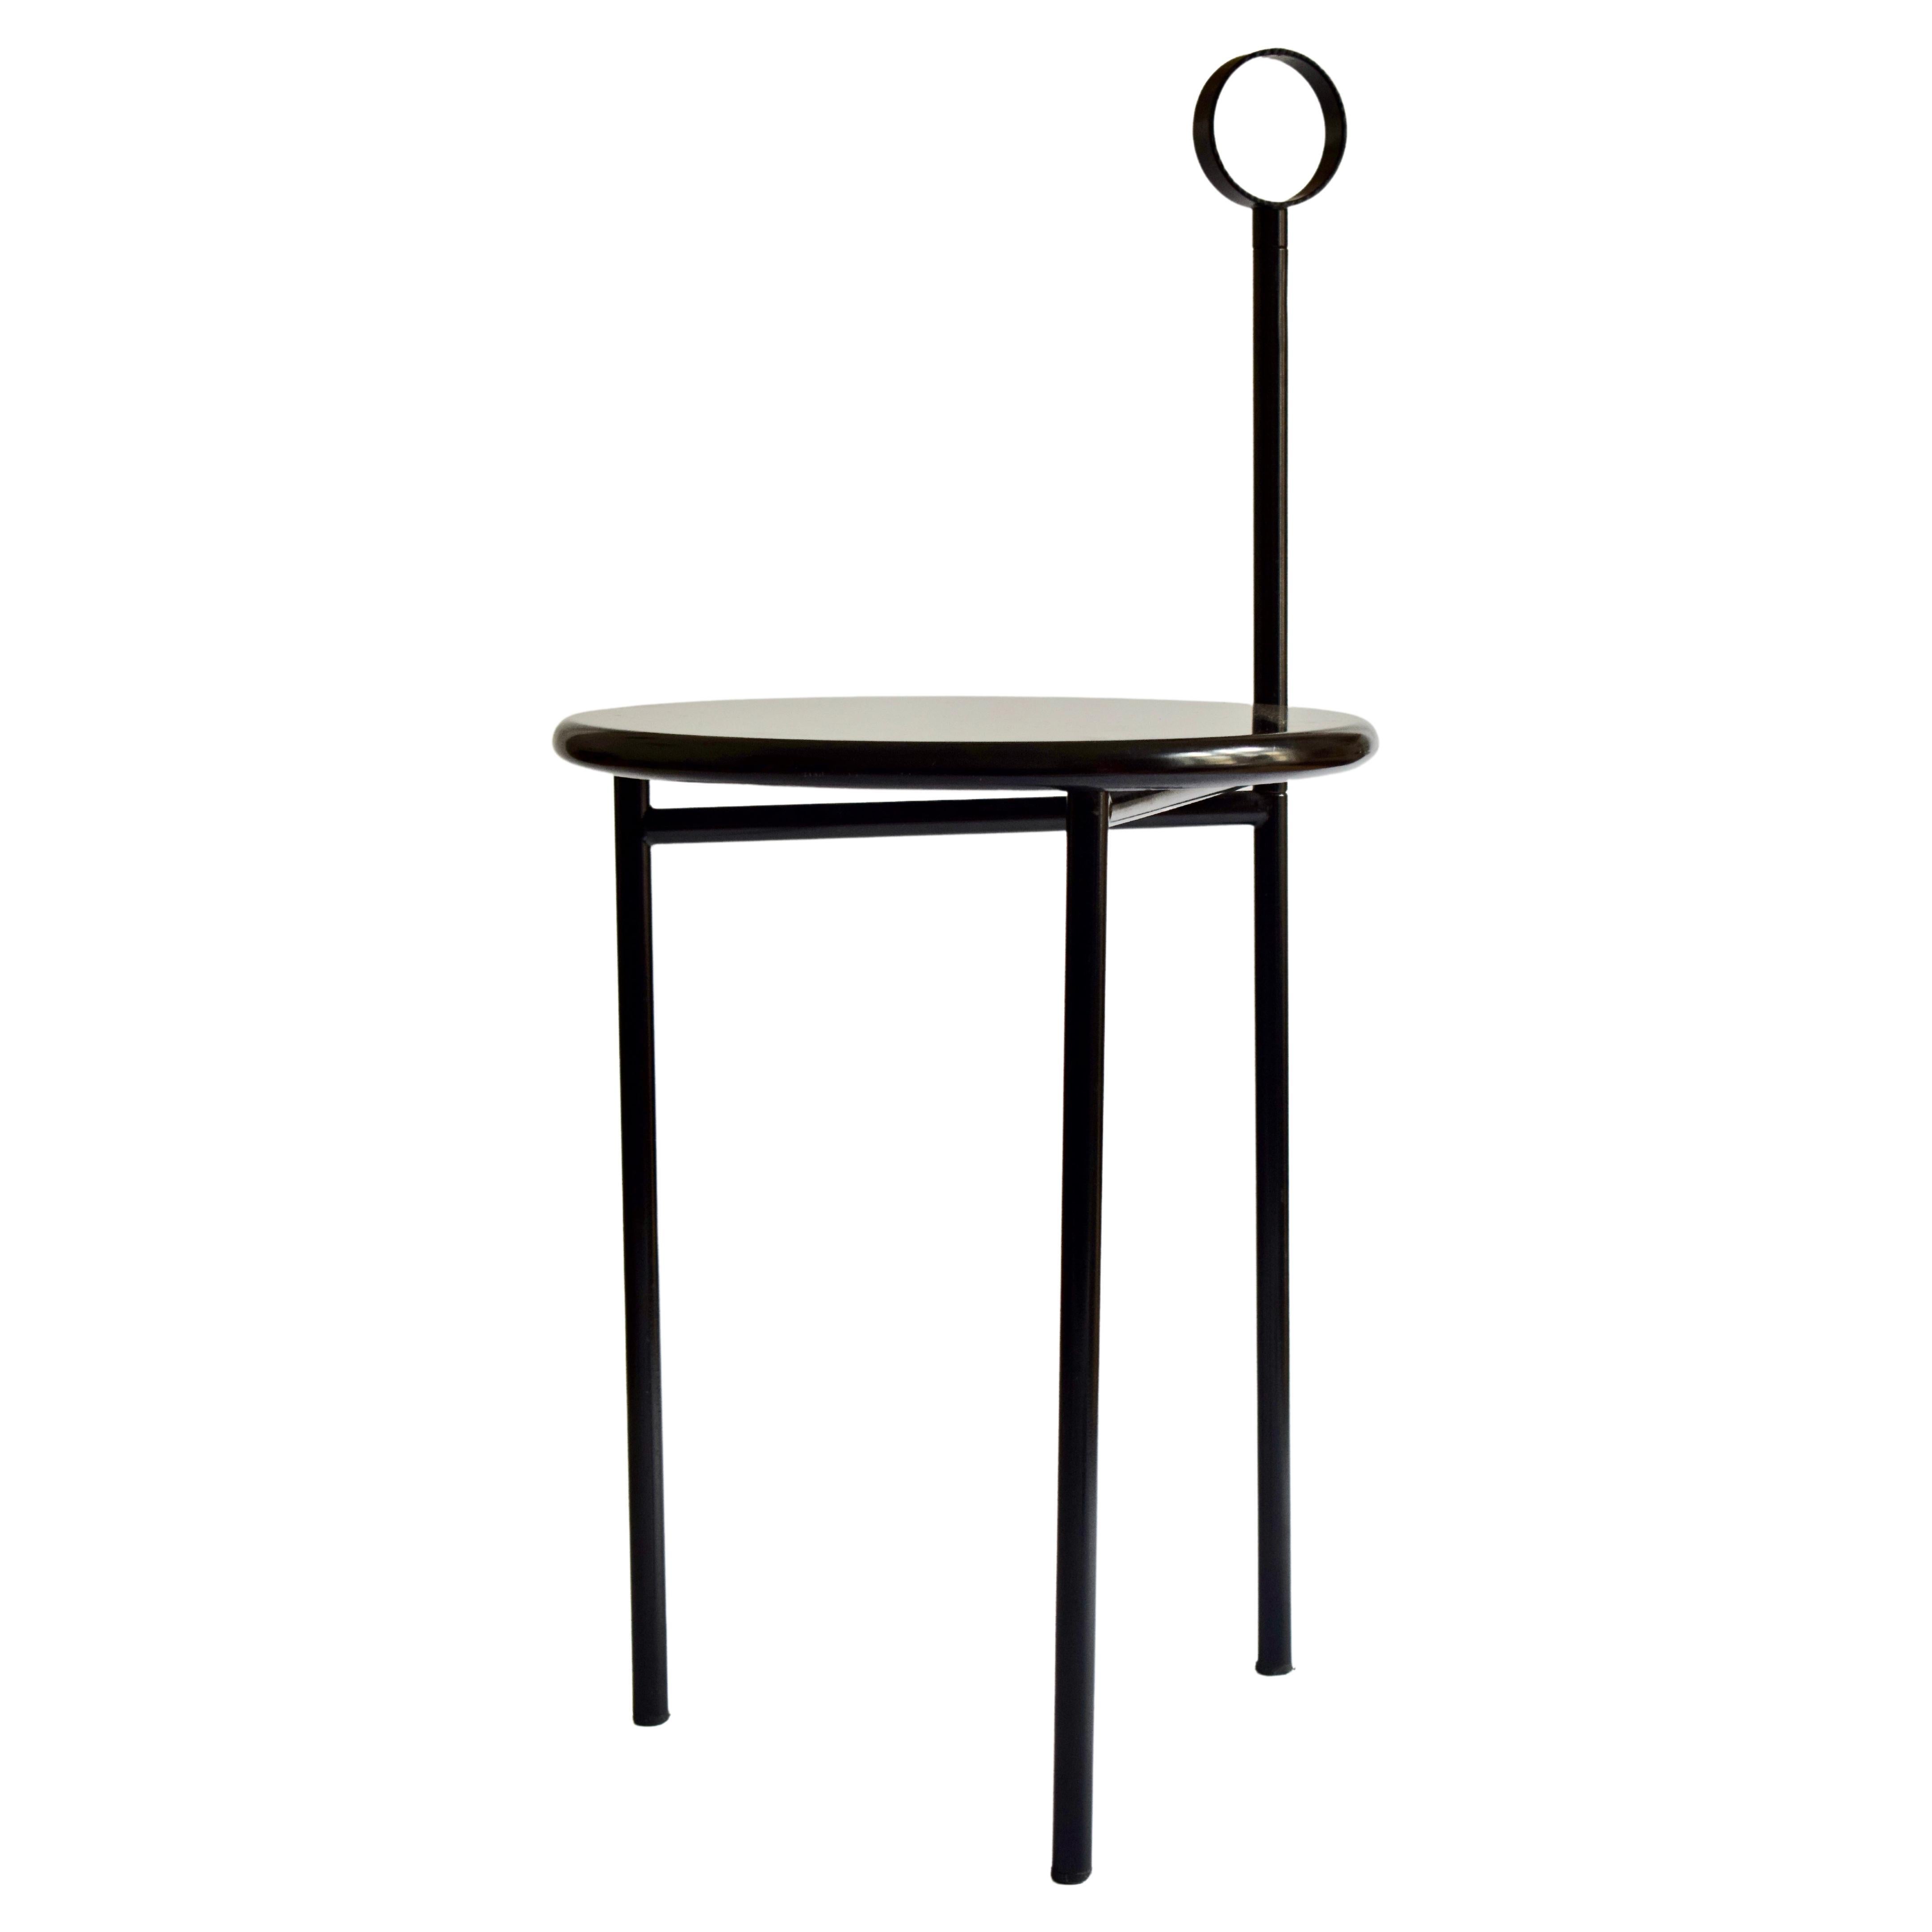 Mickville" Par Philippe Starck Pour Driade, 1985 For Sale at 1stDibs